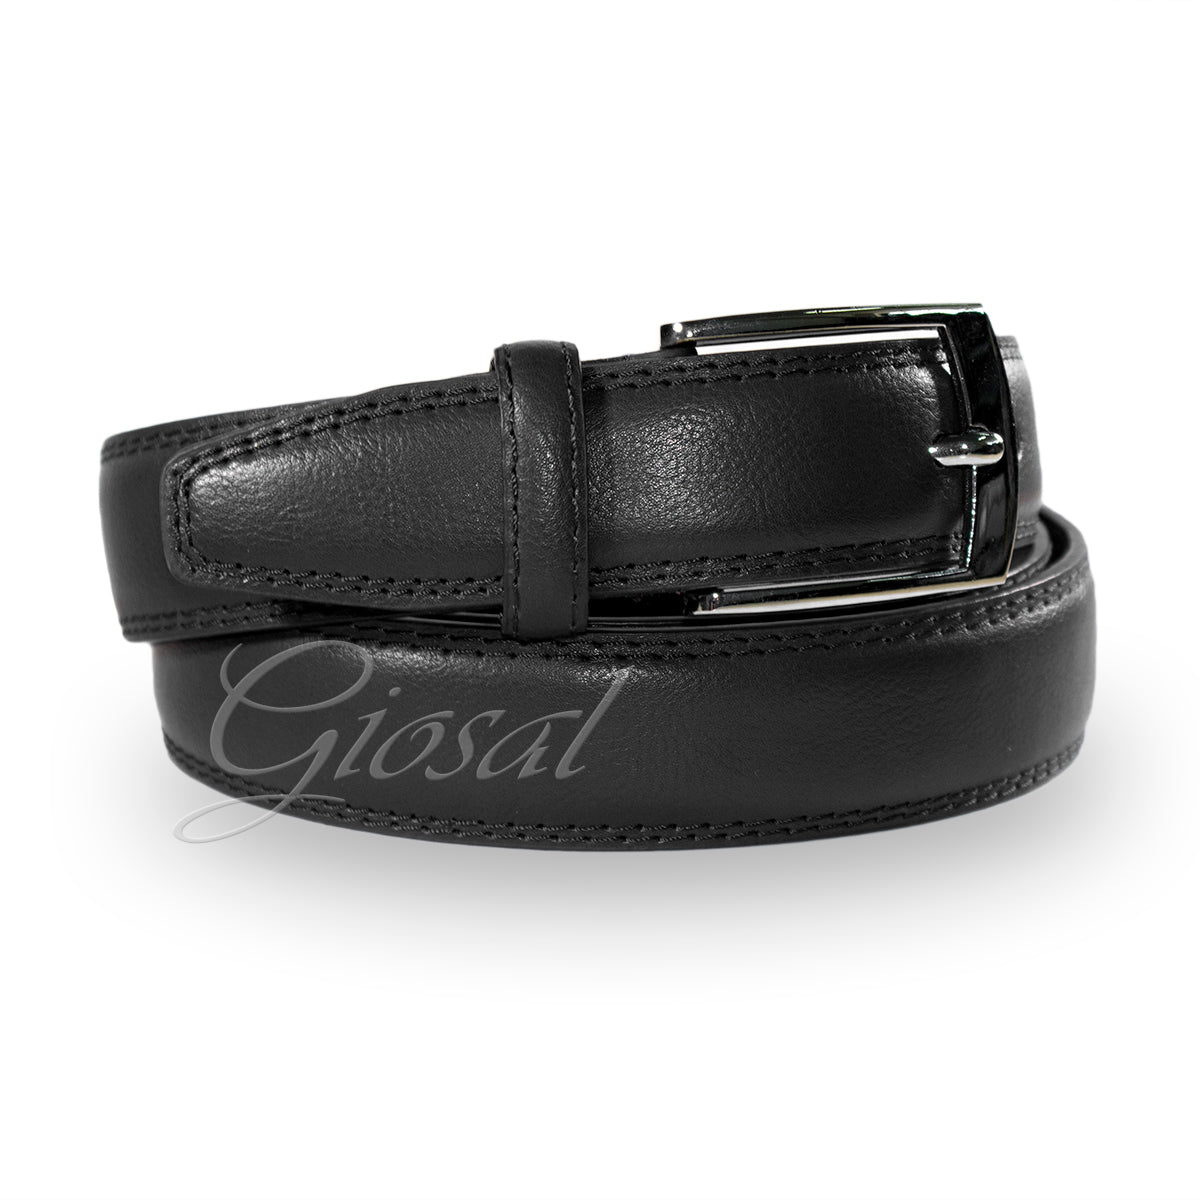 Men's Belt with Adjustable Metal Buckle Black Faux Leather Solid Color Basic GIOSAL-A2042A